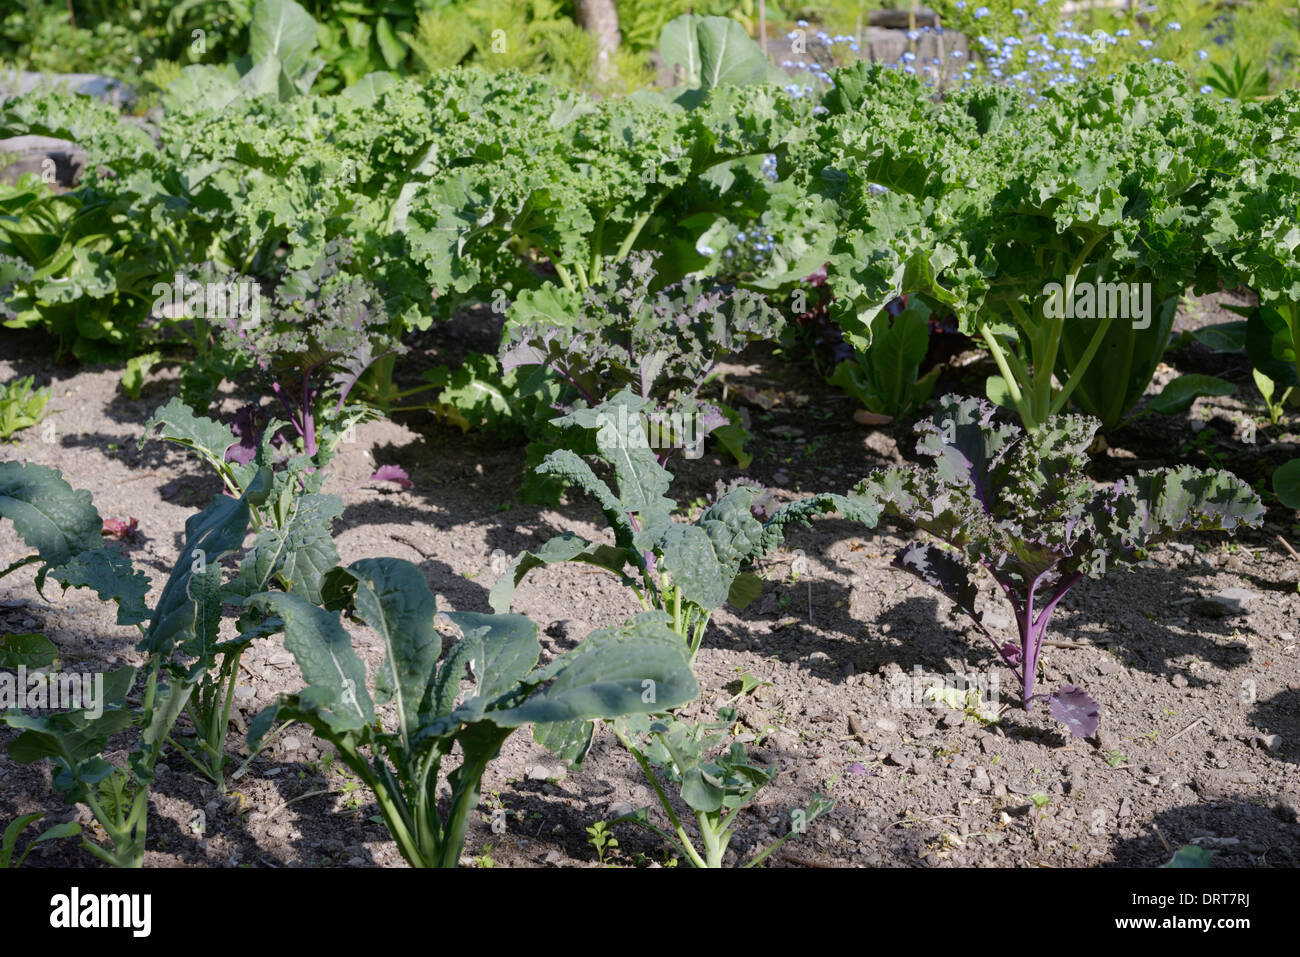 Kale plants, 'Nero di Toscana', 'Scarlet Curly' and 'Starbor', Wales, UK. Stock Photo